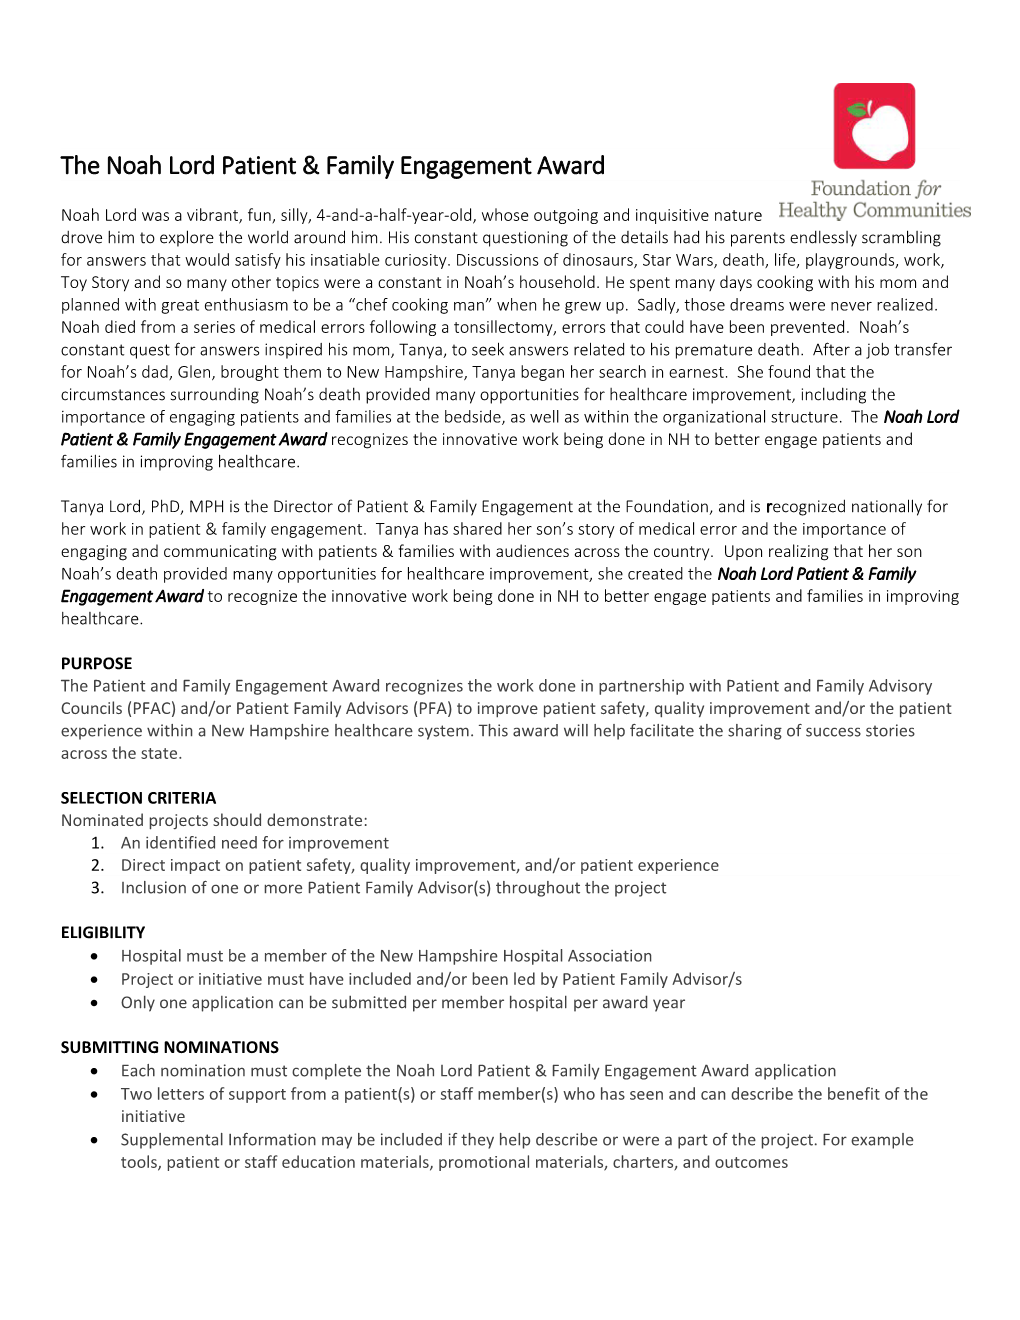 The Noah Lord Patient Family Engagement Award